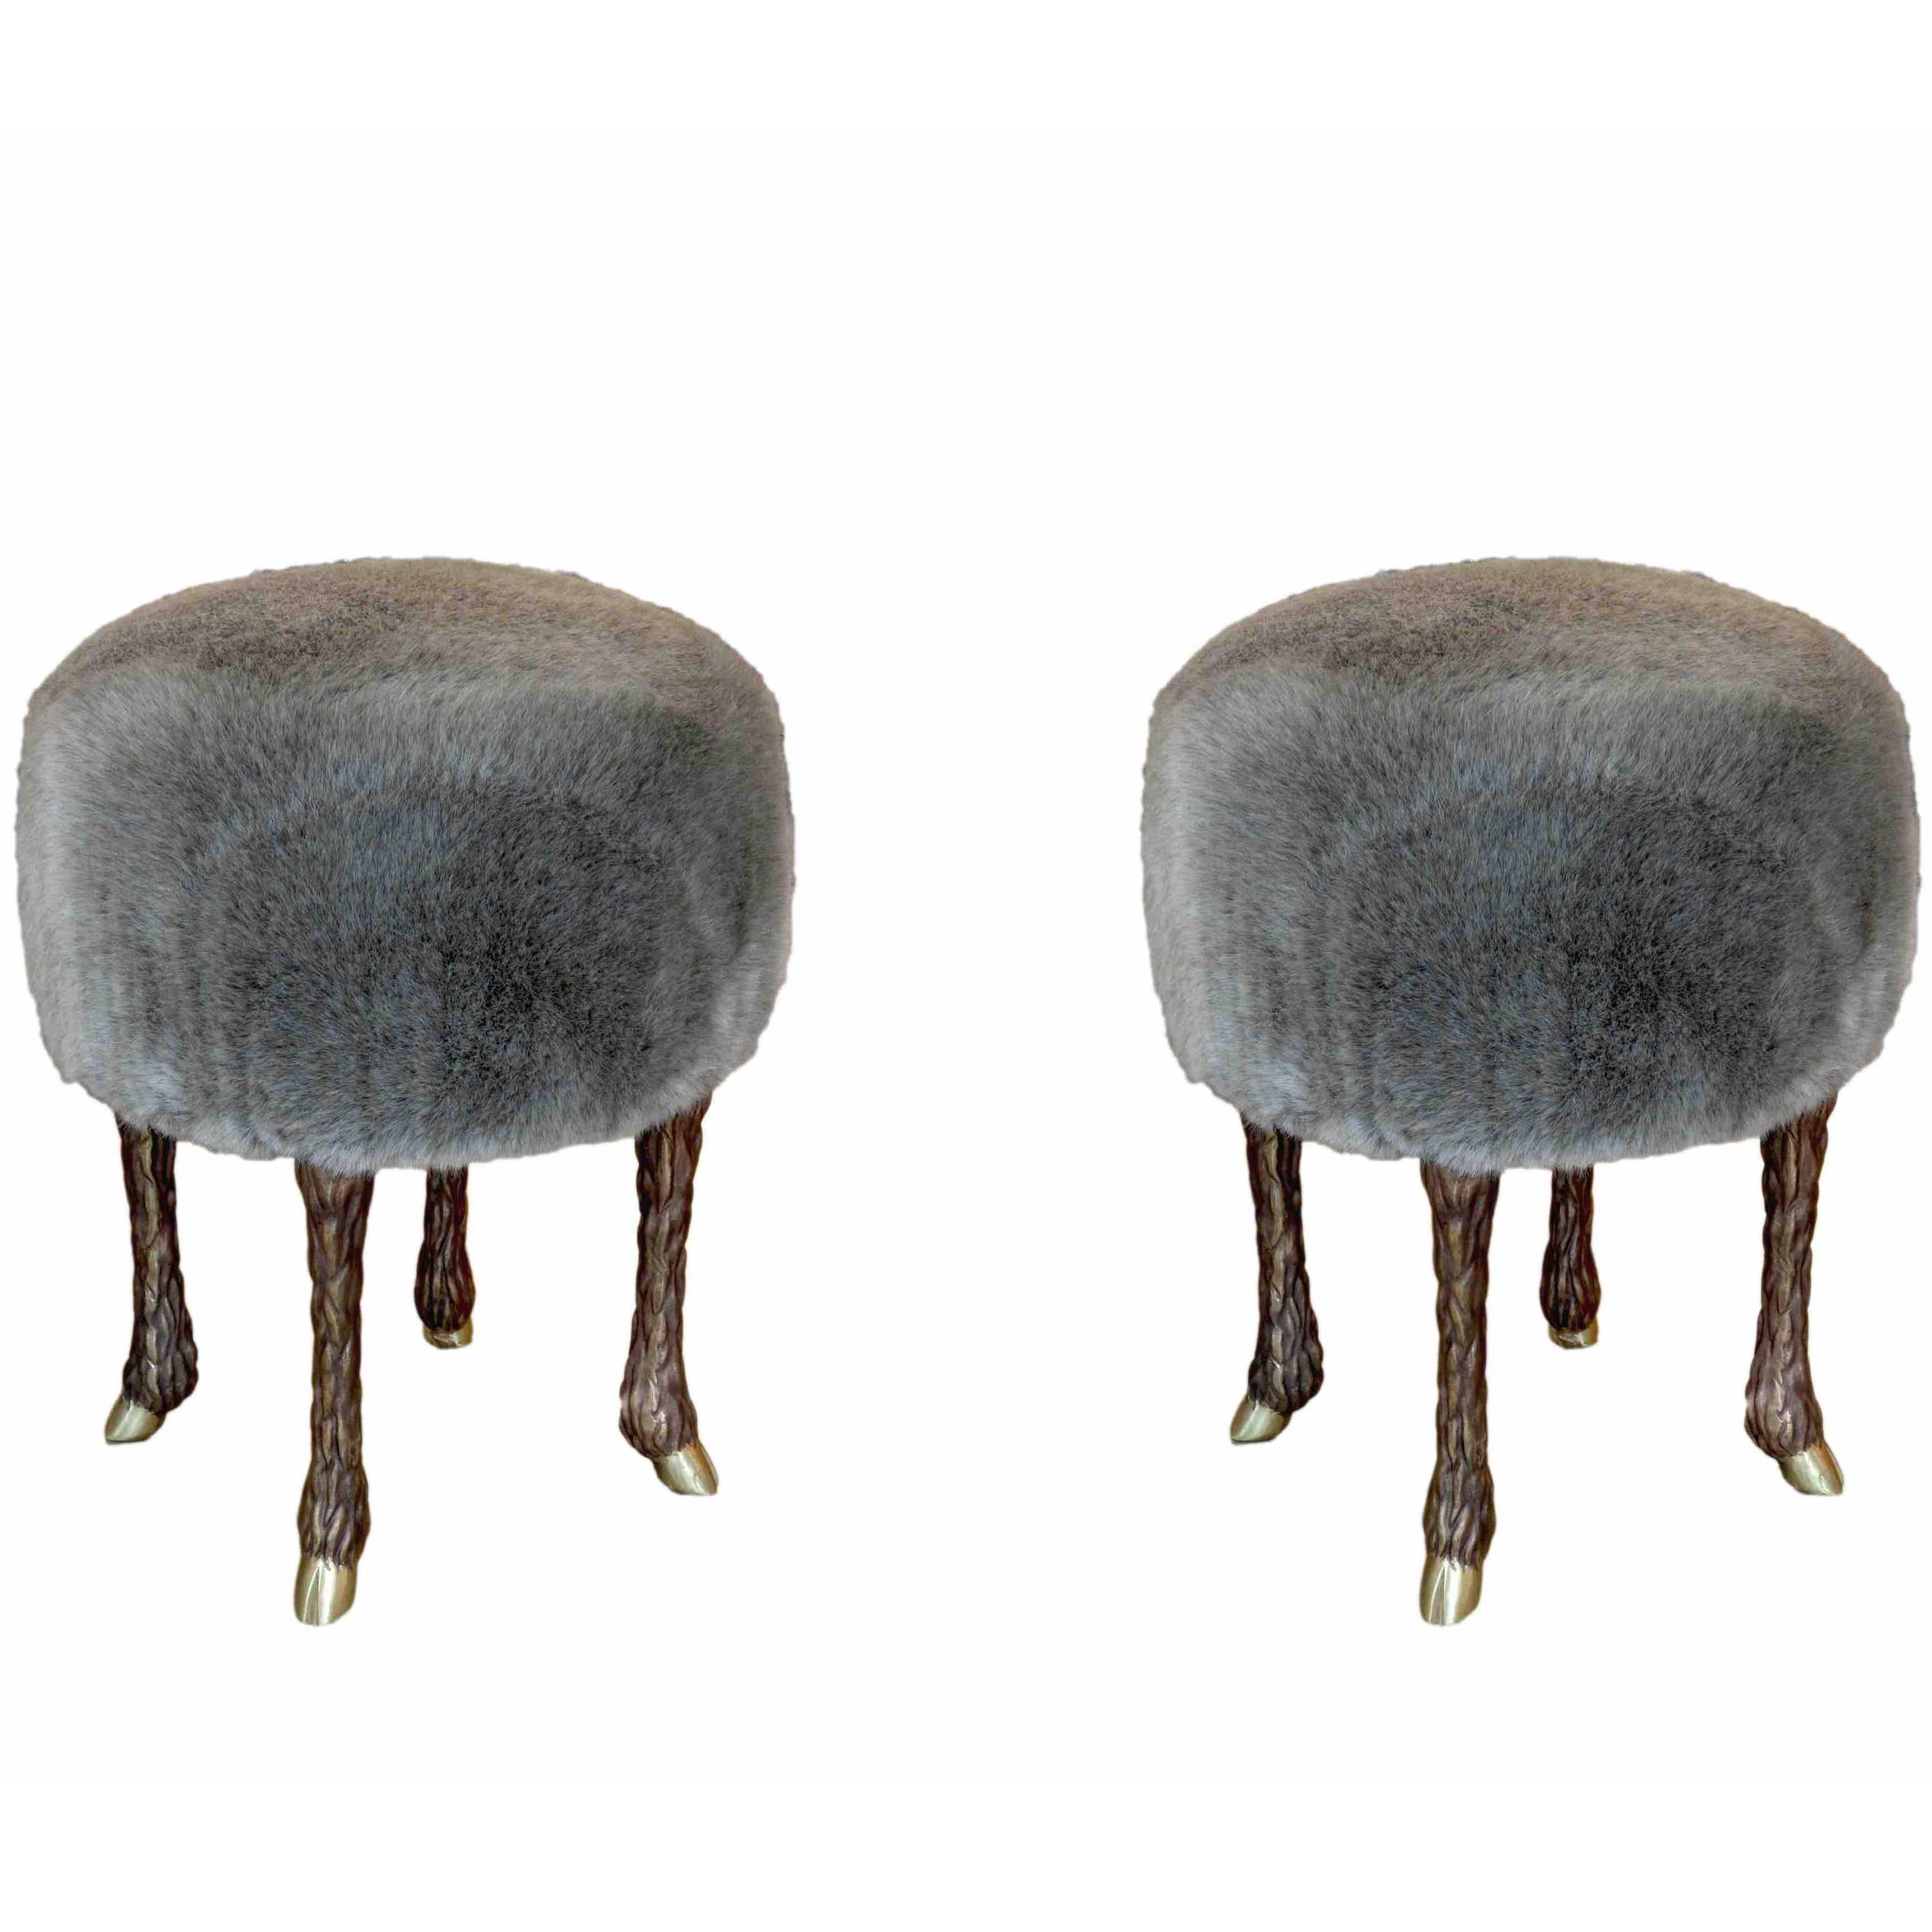 Pair of "Pieds De Bouc" Stools by Marc Bankowsky For Sale